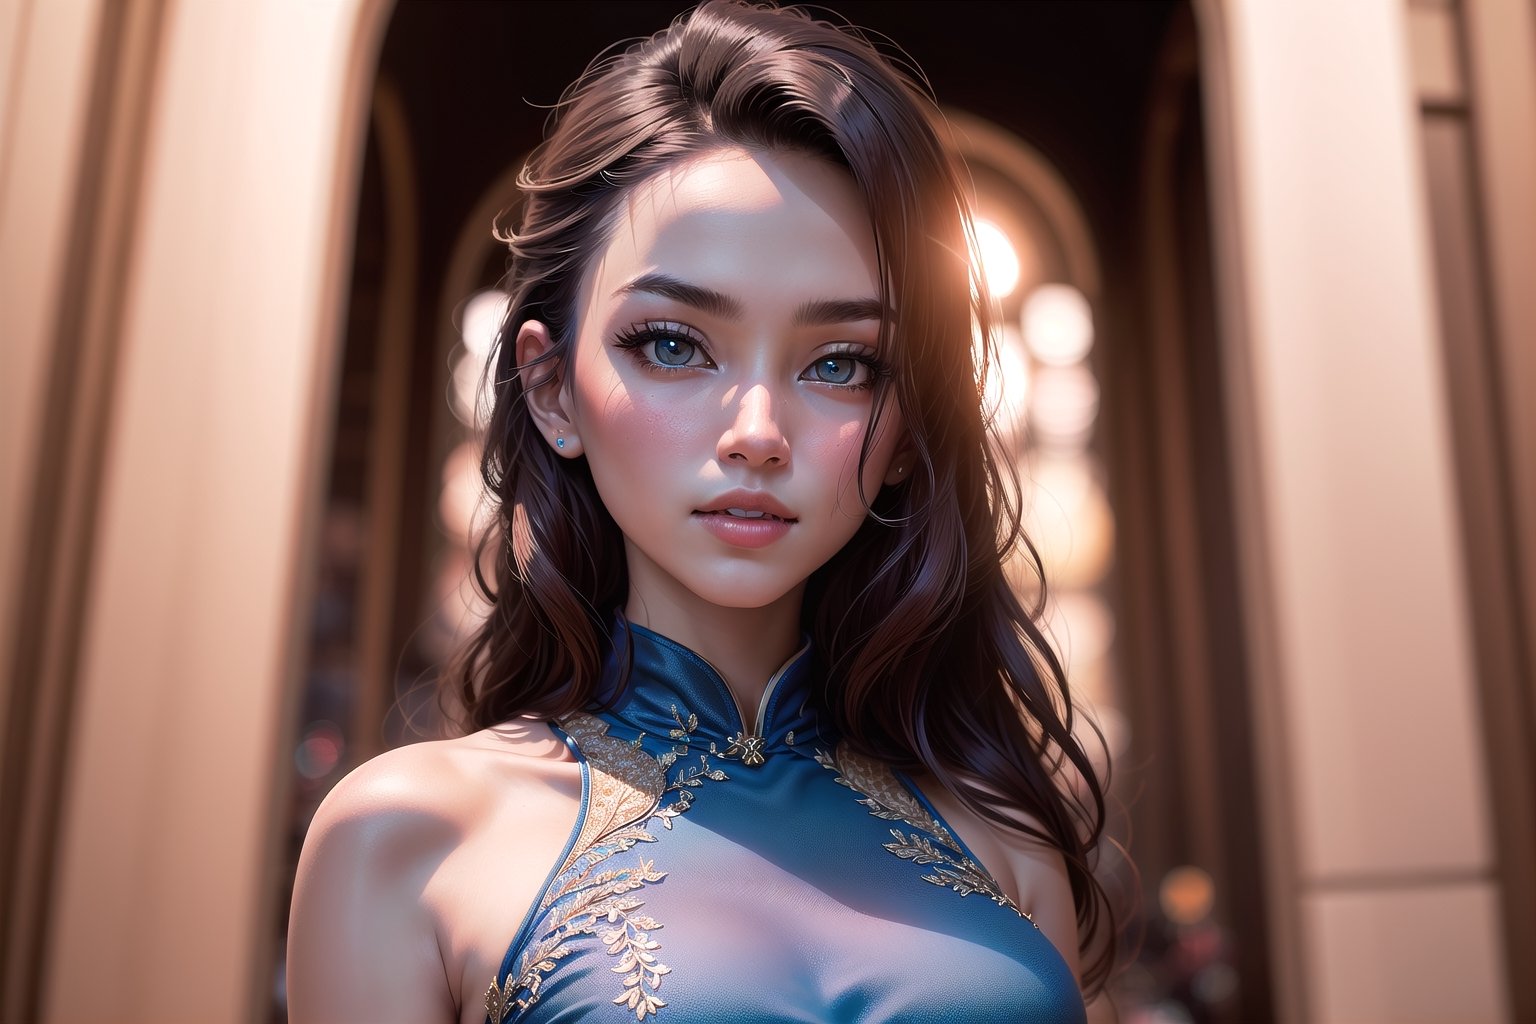 masterpiece, (best quality:1.4), ultra-detailed, 1 girl, 22yo, wear daily elegant blue outfit, , high resolution, genuine emotion, detail face , Enhance,  bright light colors,  8k, vivid colors,Enhance